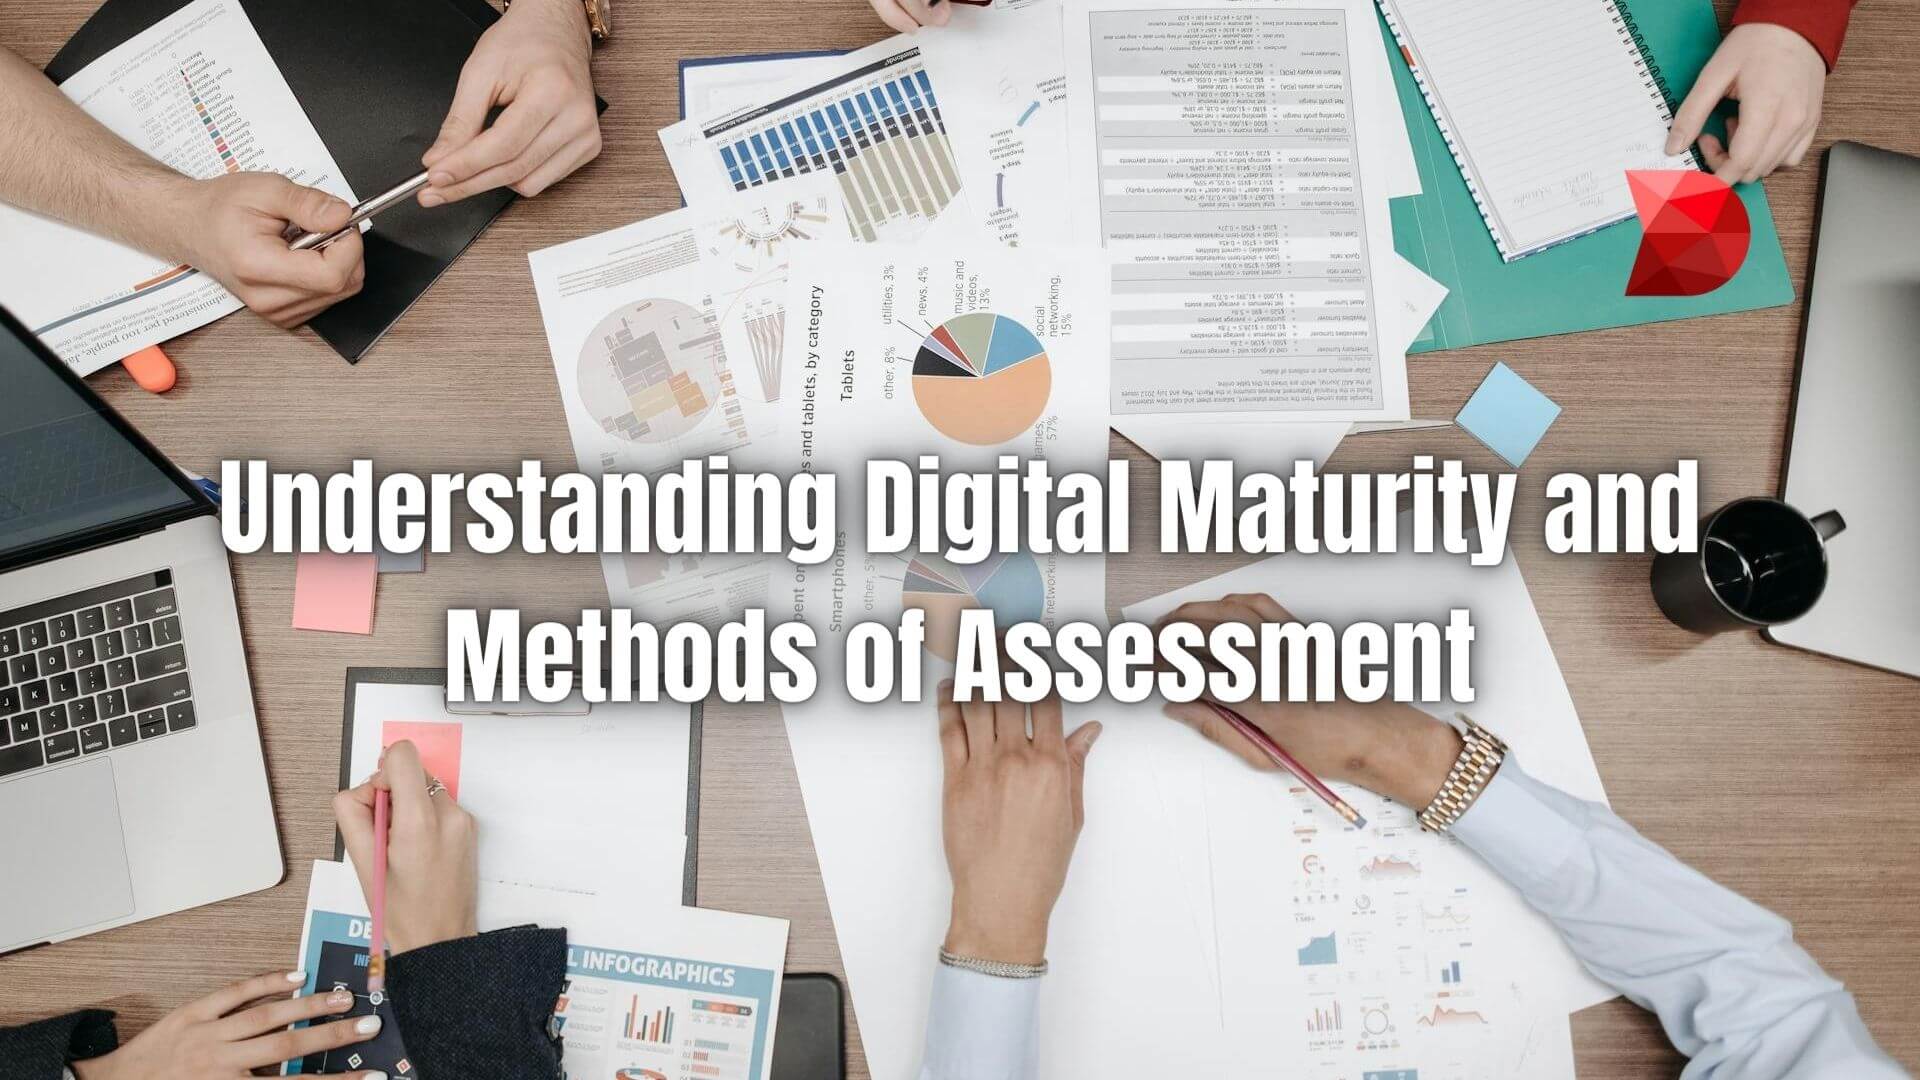 Unlock the secrets of digital maturity assessment methods with our complete guide. Learn how to navigate the digital landscape effectively.